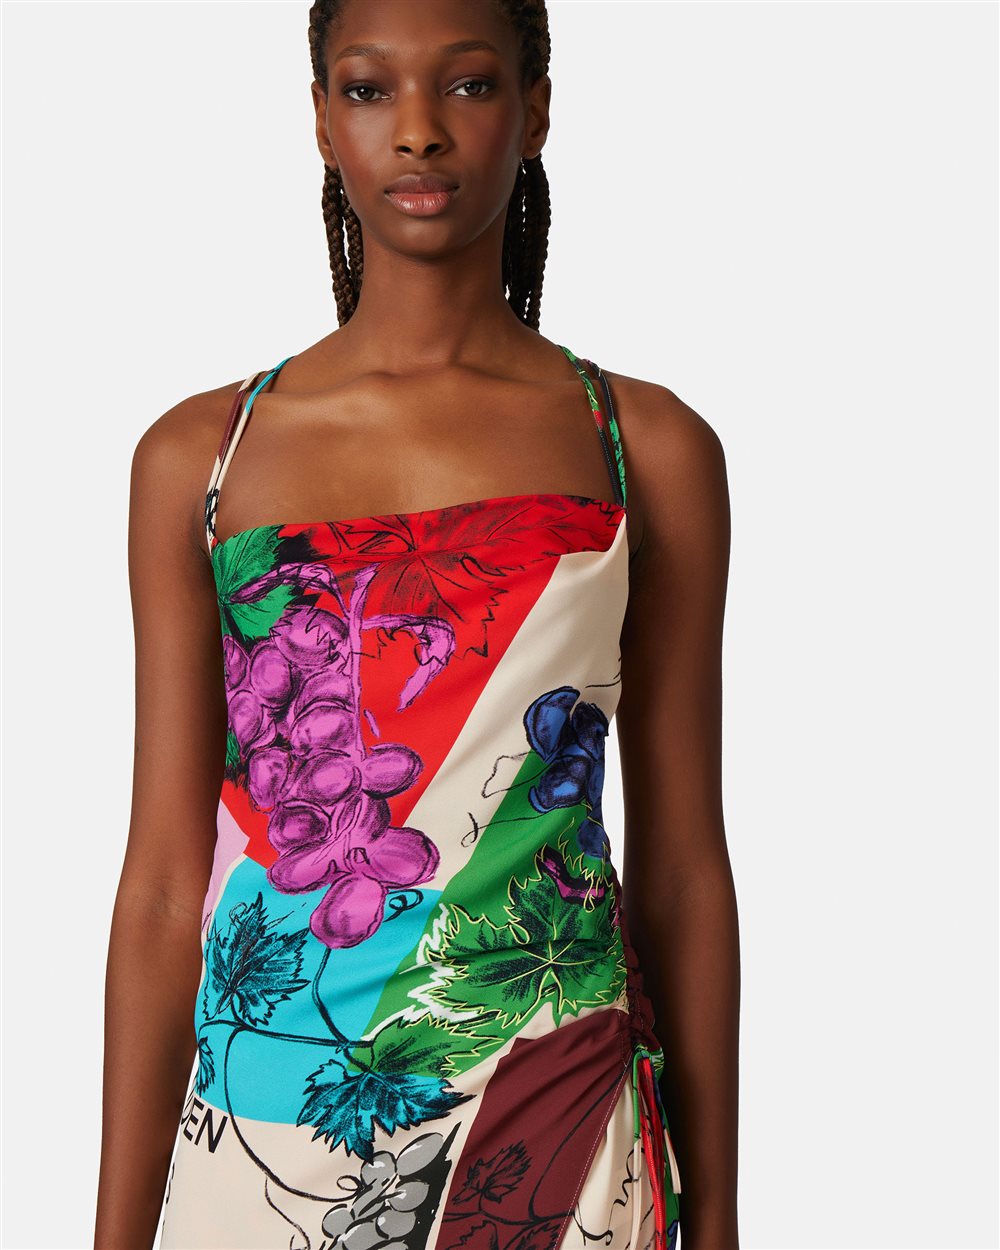 Dress with Forbidden Fruit print and logo - Iceberg - Official Website